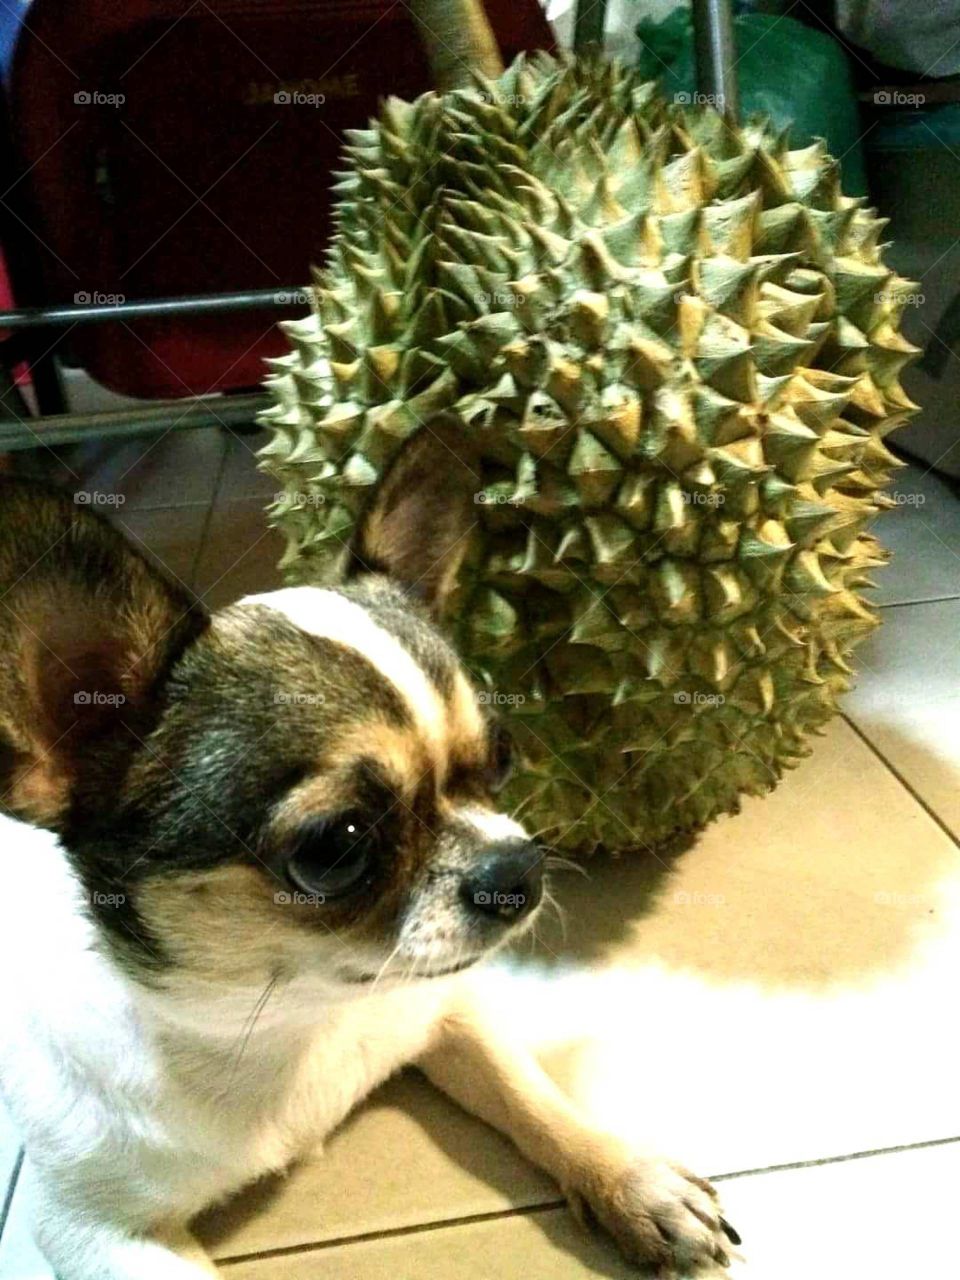 Chihuahua and durian.